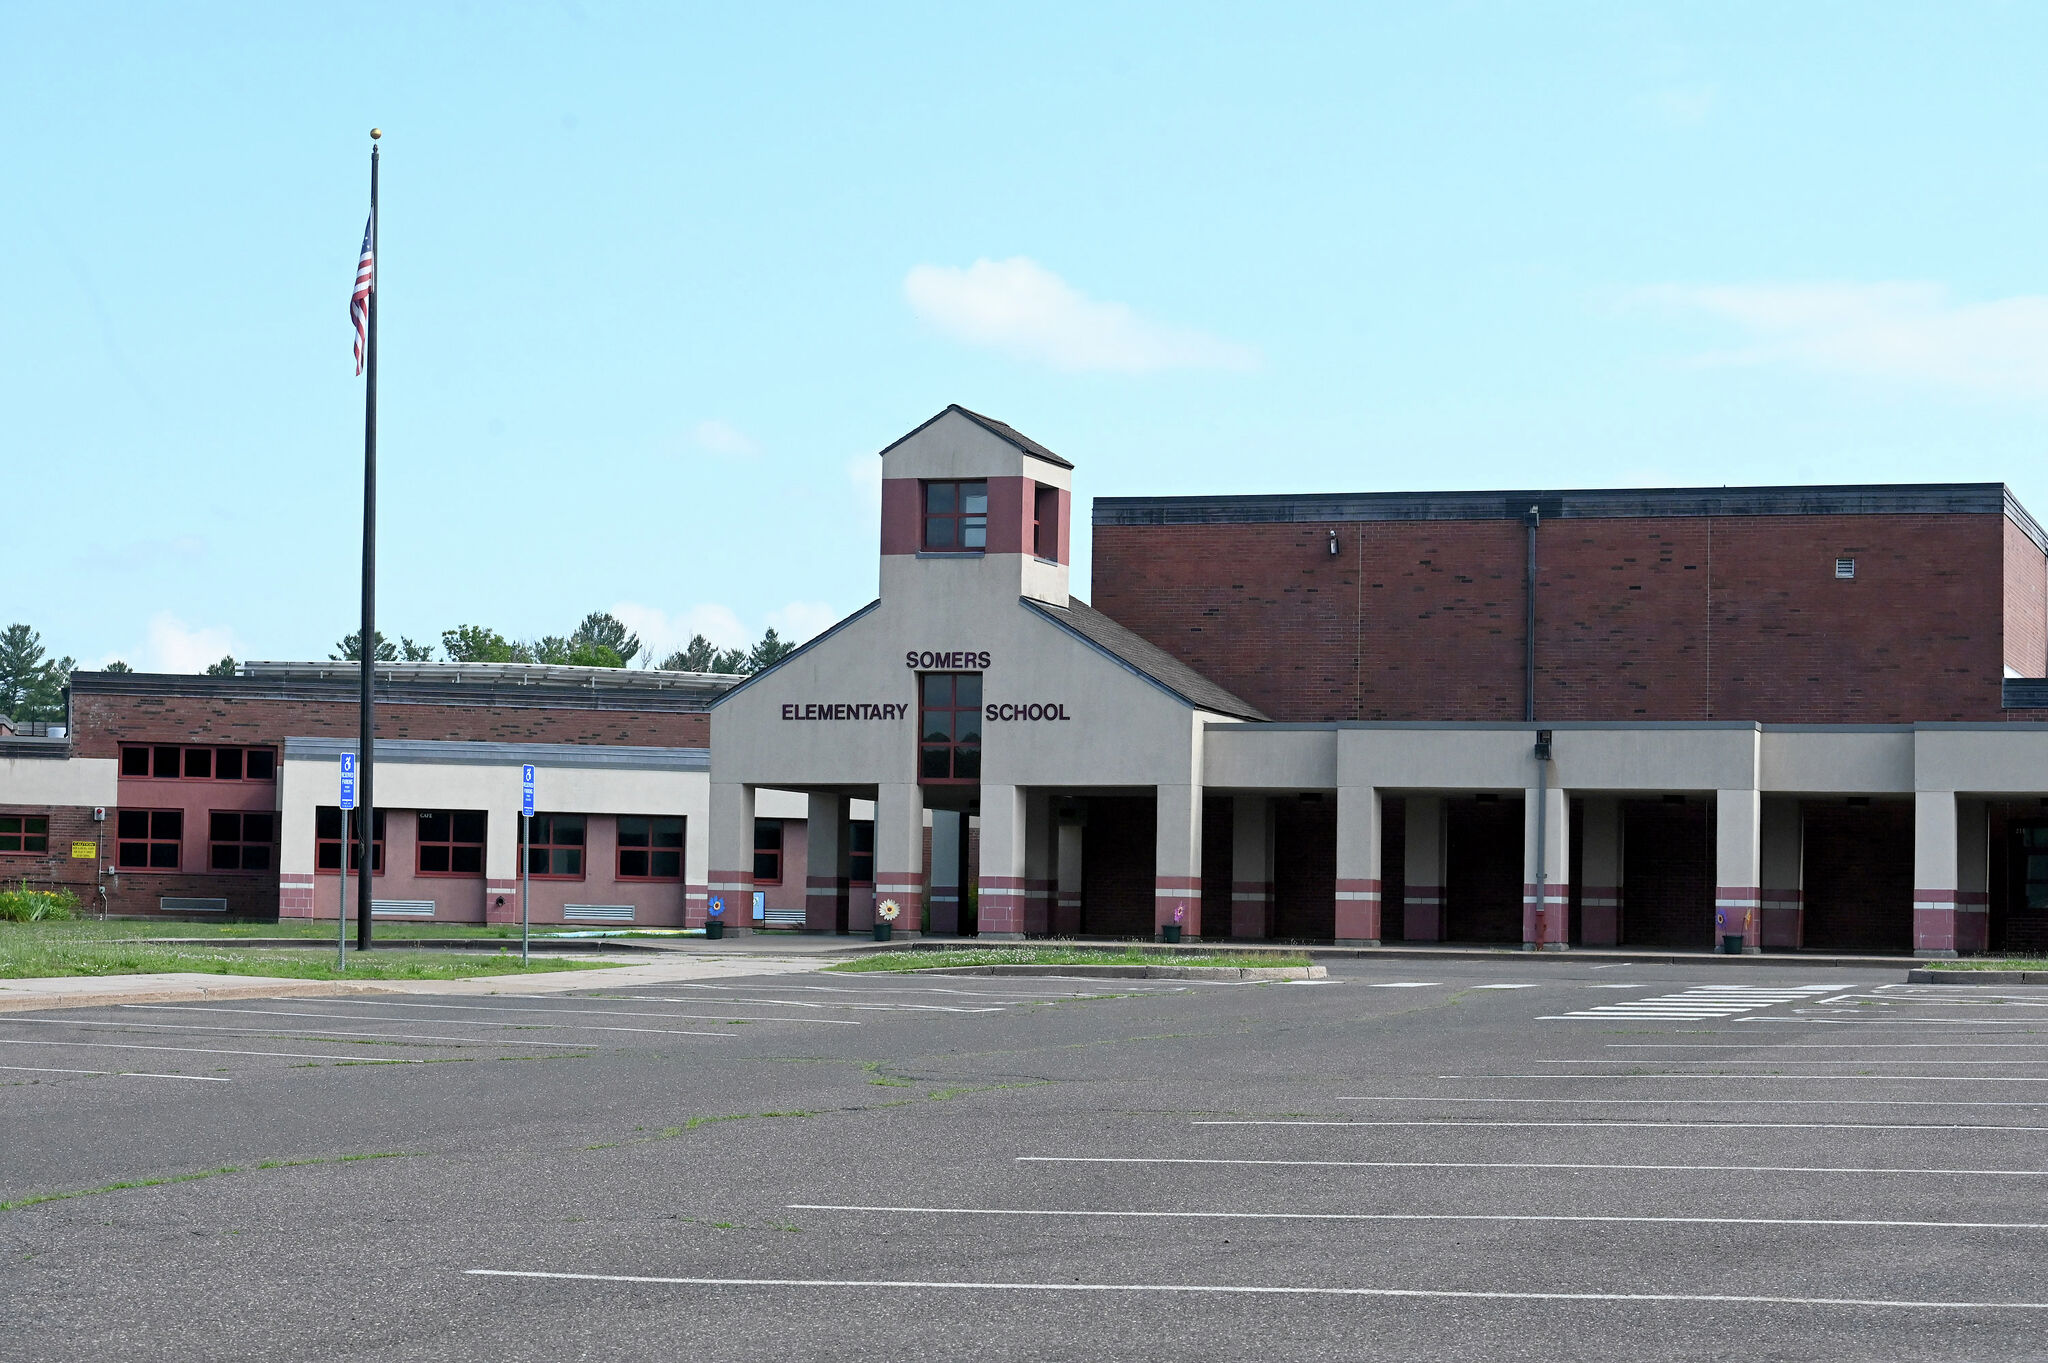 Somers school HVAC system is the focus of proposed project